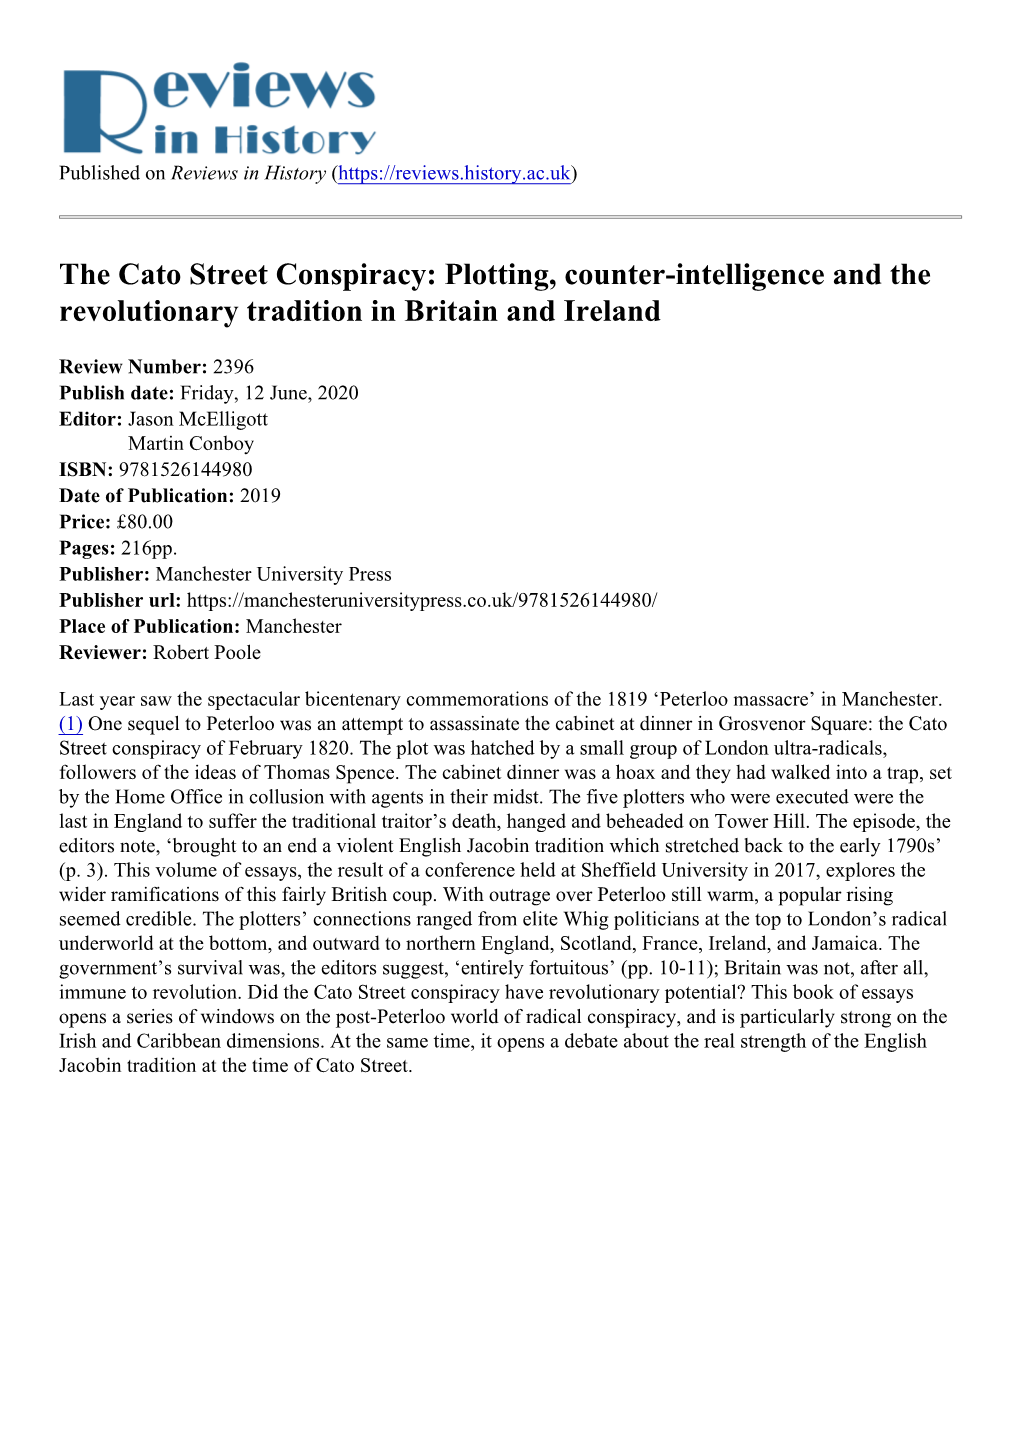 The Cato Street Conspiracy: Plotting, Counter-Intelligence and the Revolutionary Tradition in Britain and Ireland